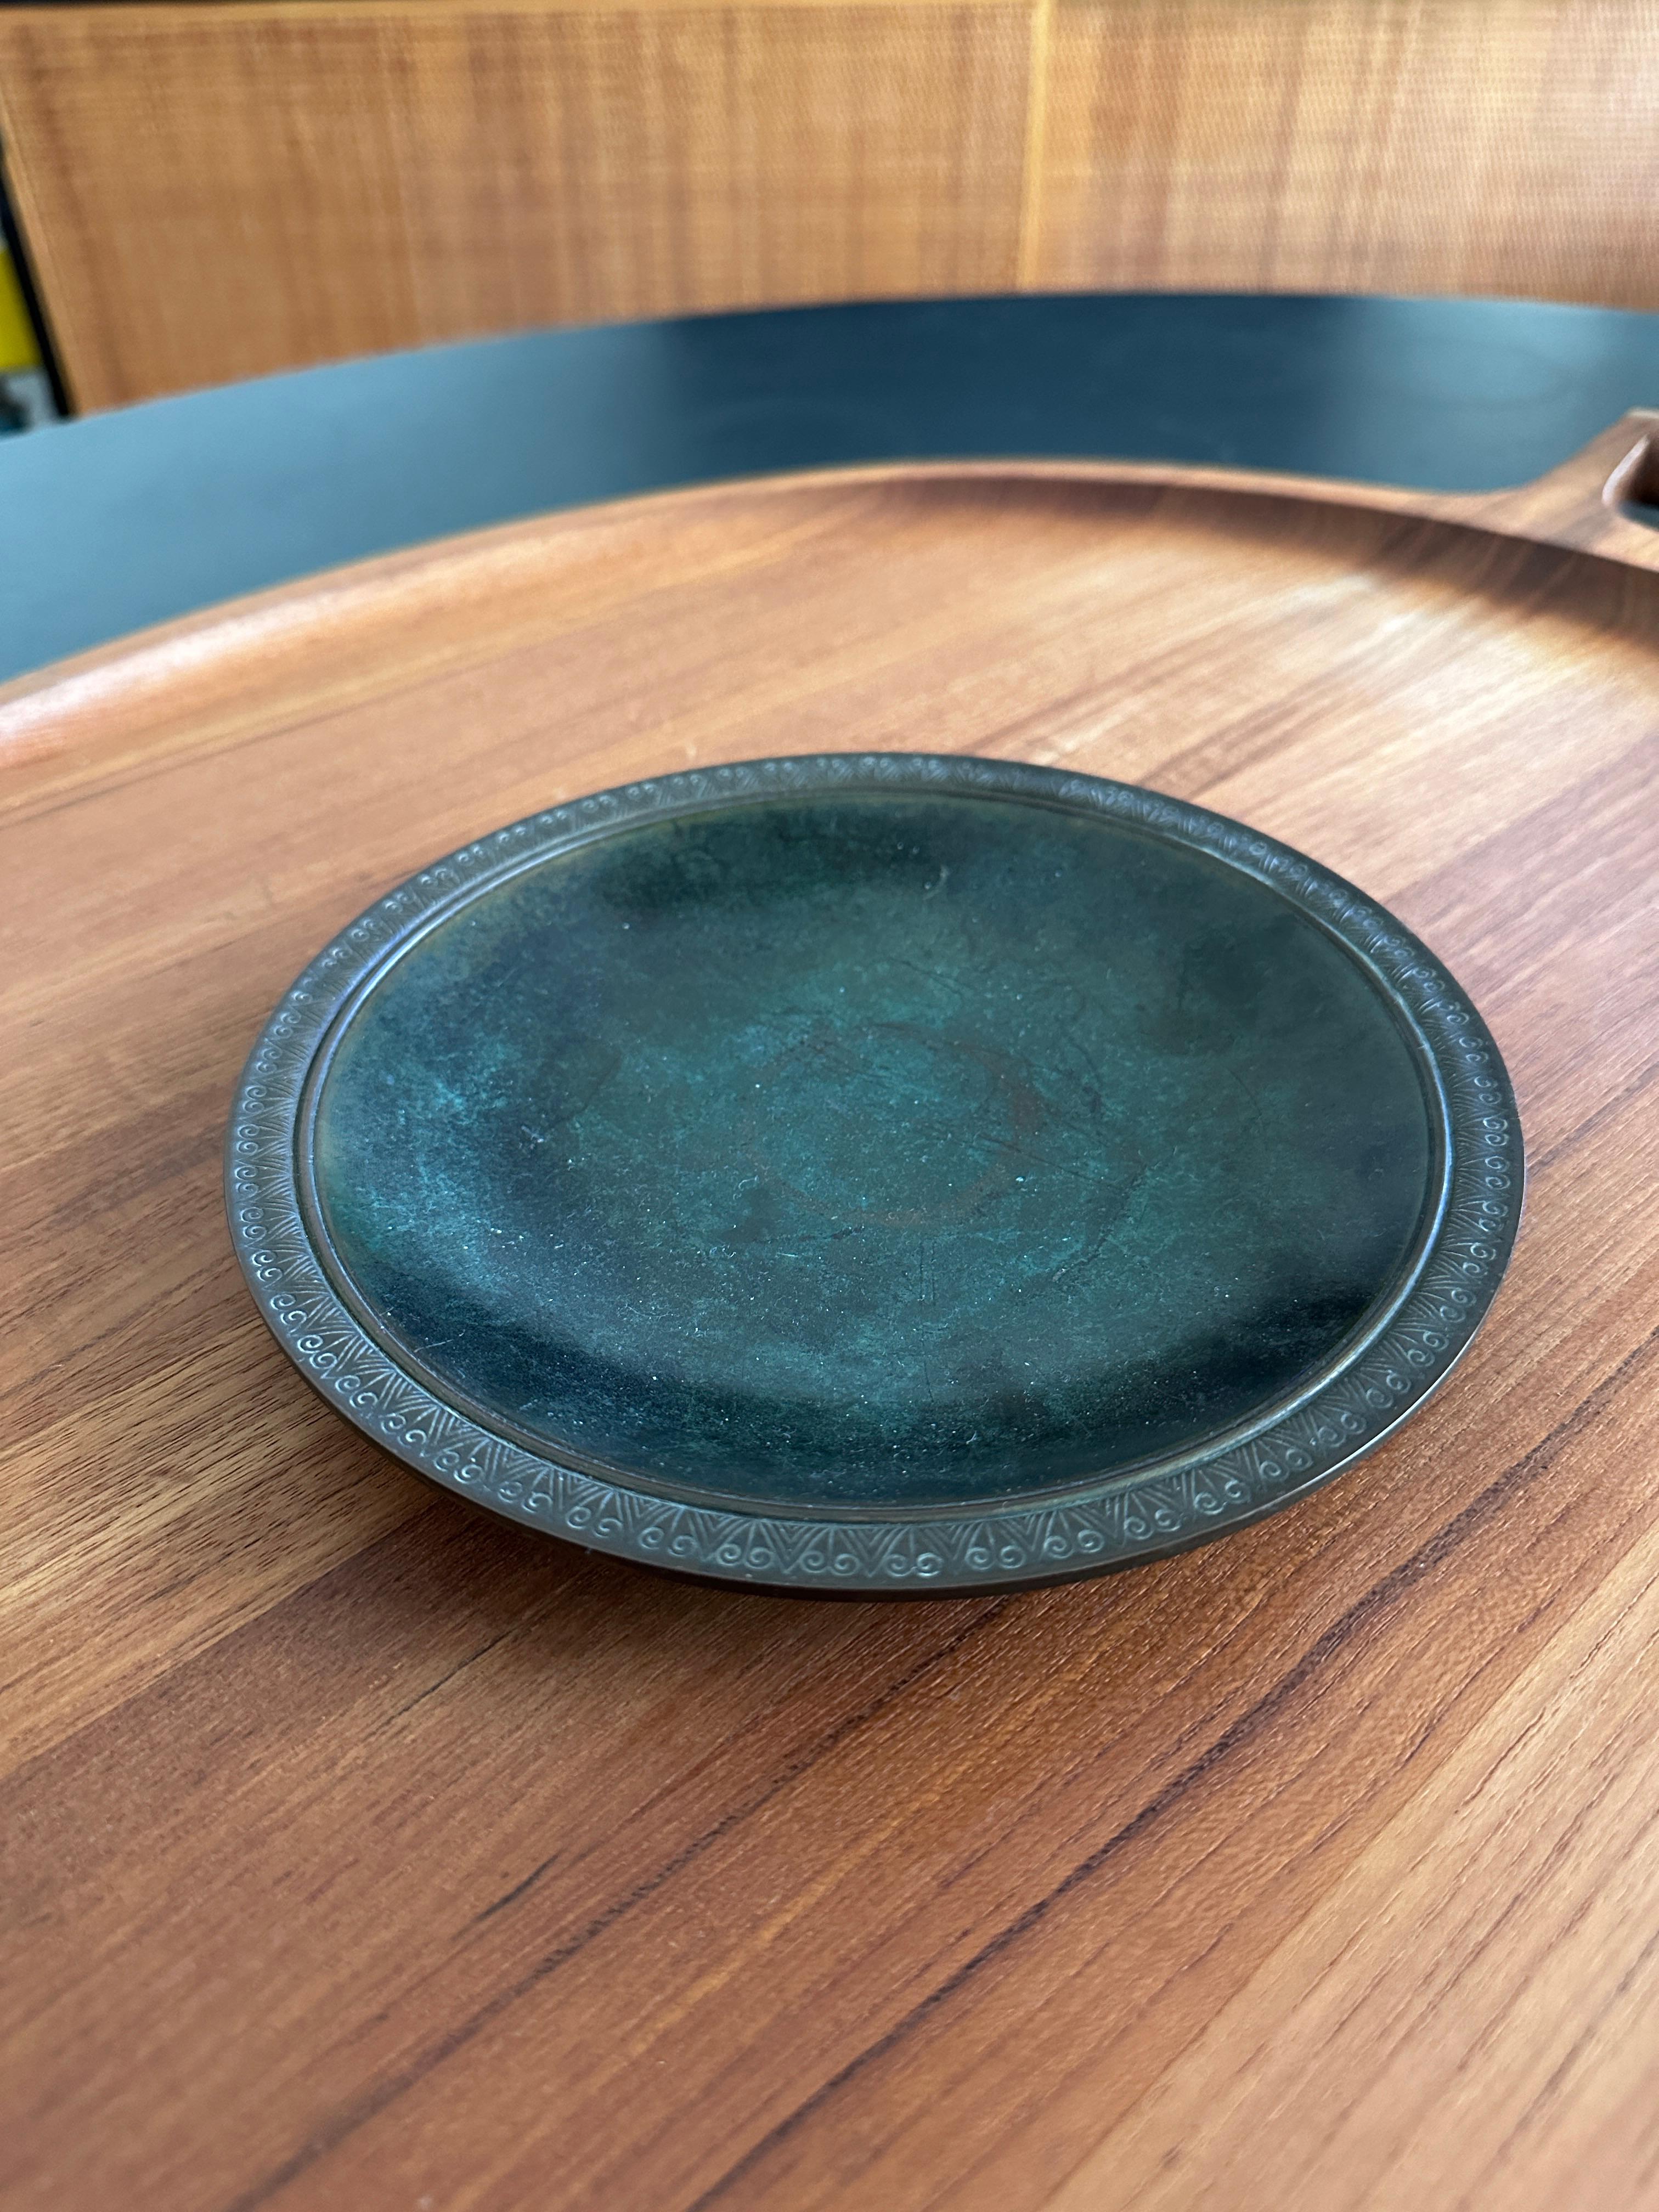 A beautiful patinated bronze shallow bowl designed by Just Andersen. The bowl has an embossed design around the top lip. 

Just Andersen (1884-1943) was an internationally renowned designer of metal objects. Andersen is best known for his neoclassic